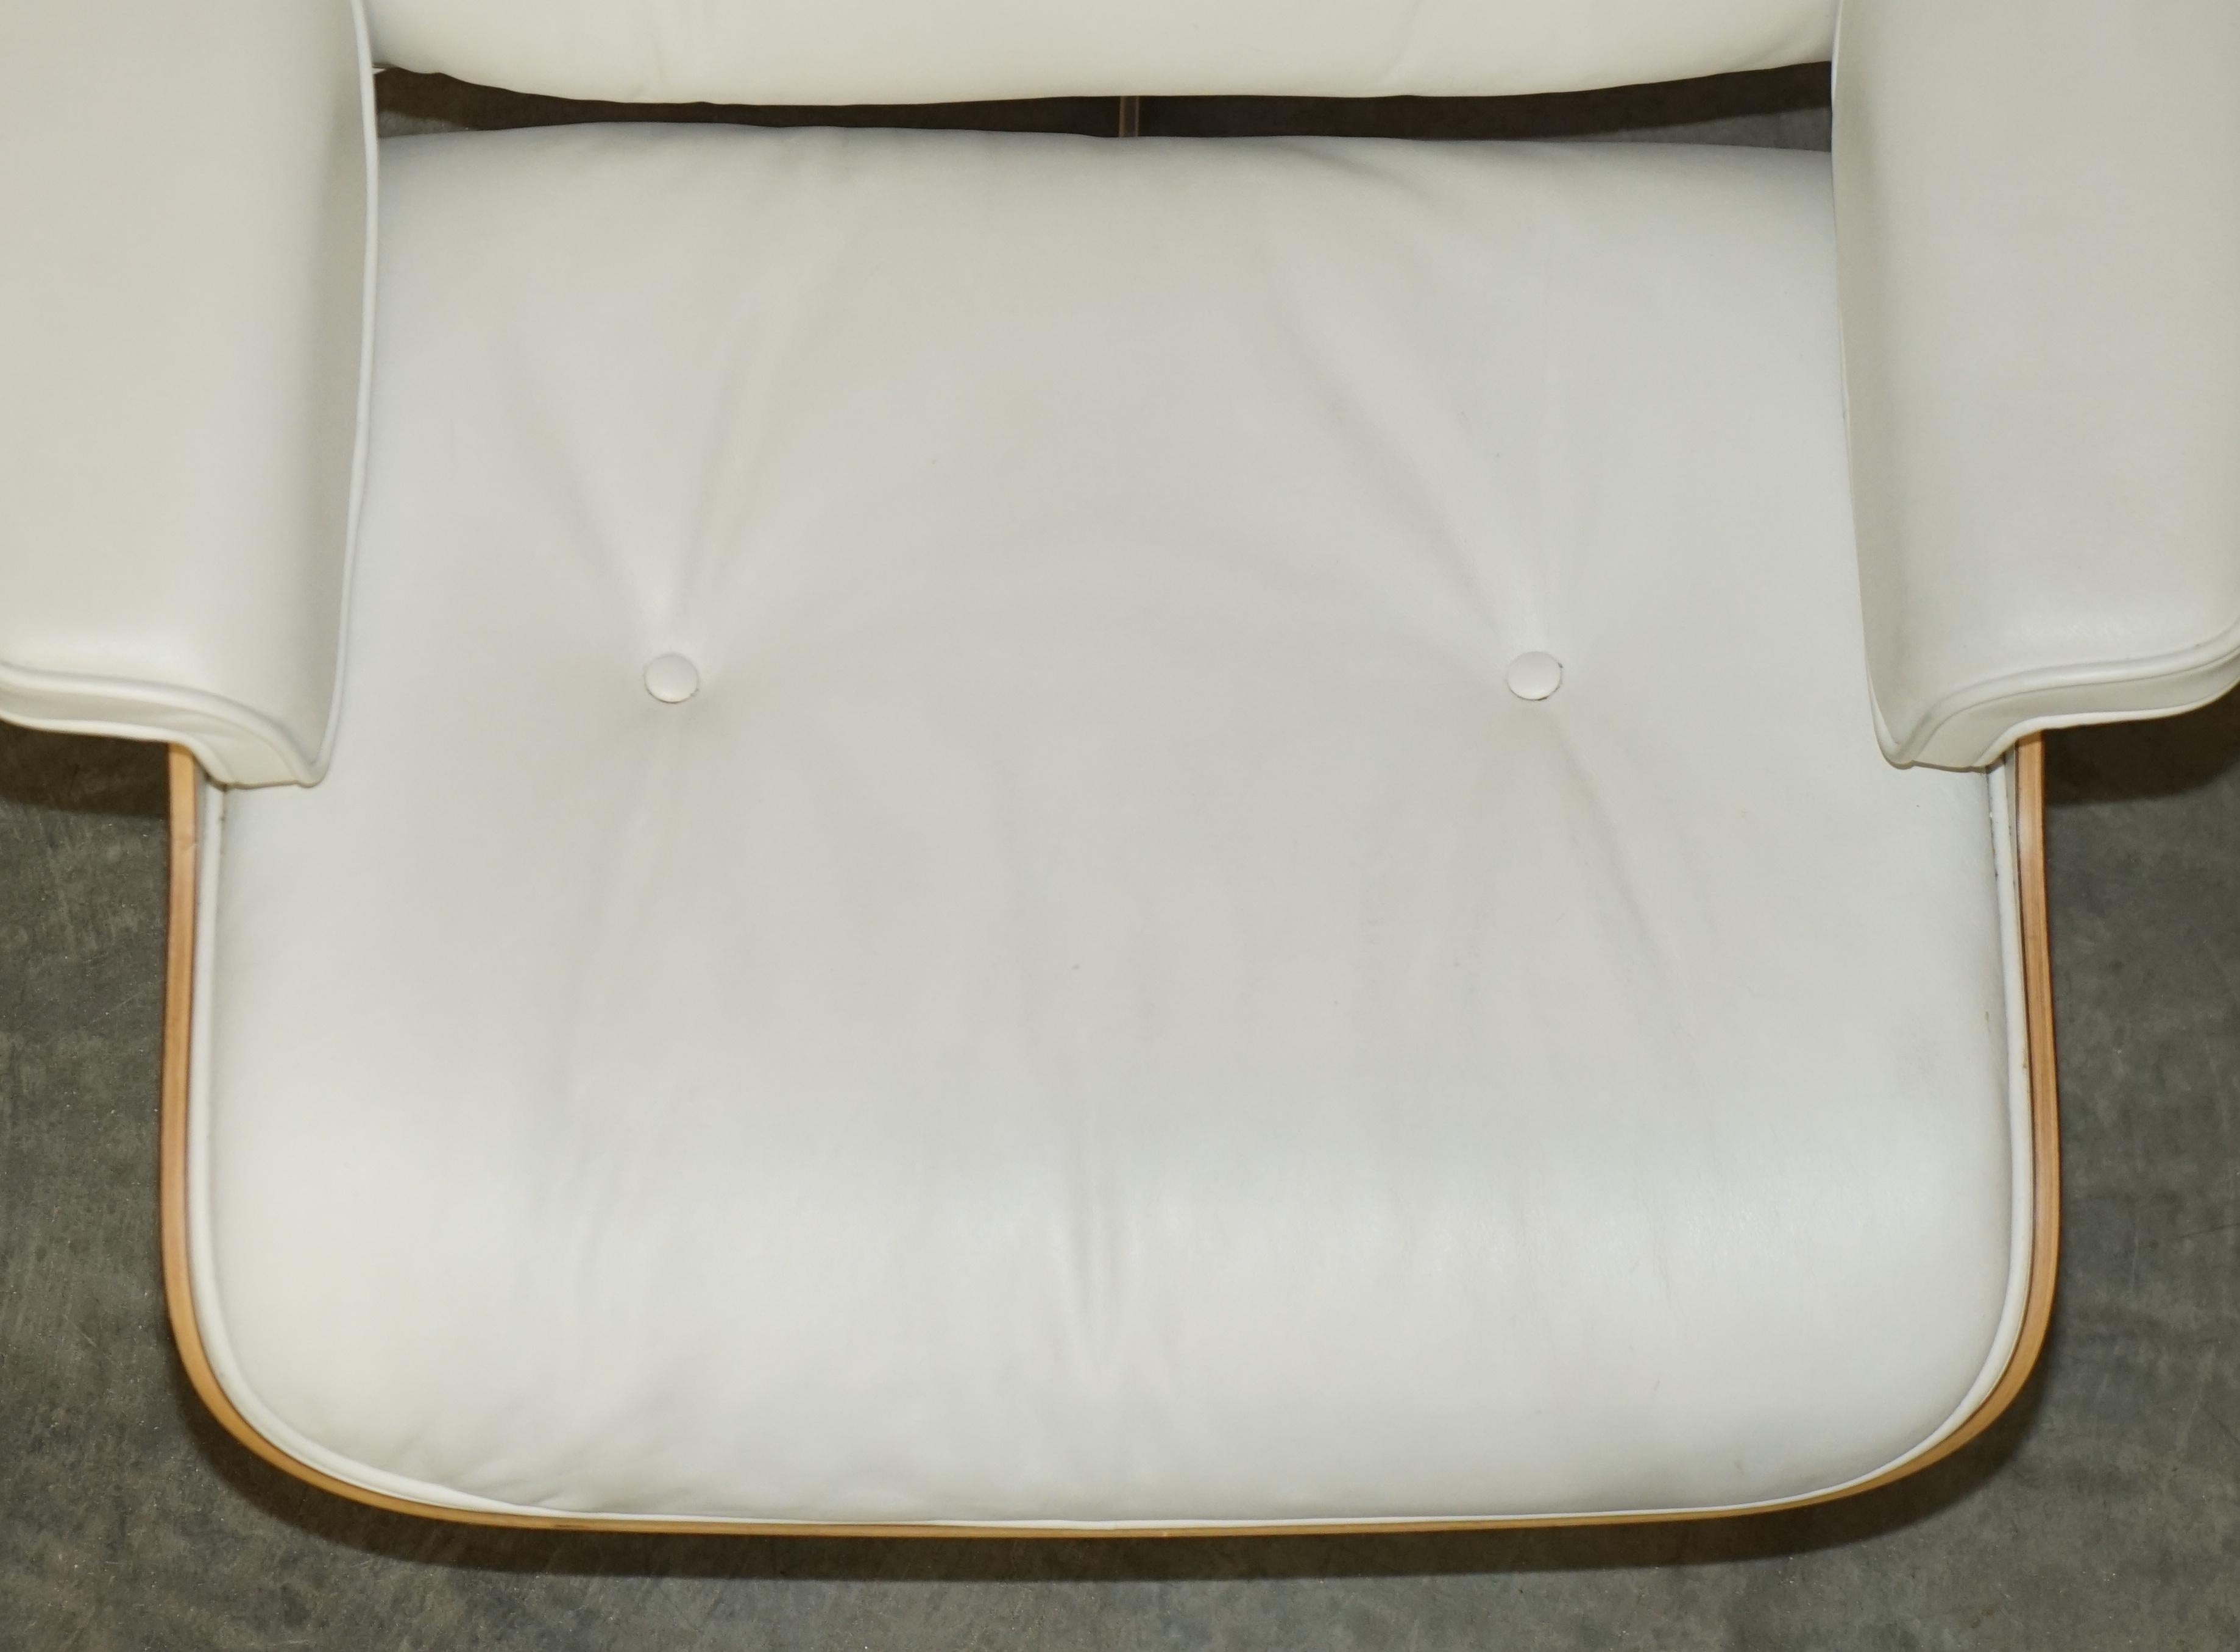 Whiting fauteuil de salon Charles and Ray Eames american cherry wood white leather en vente 9